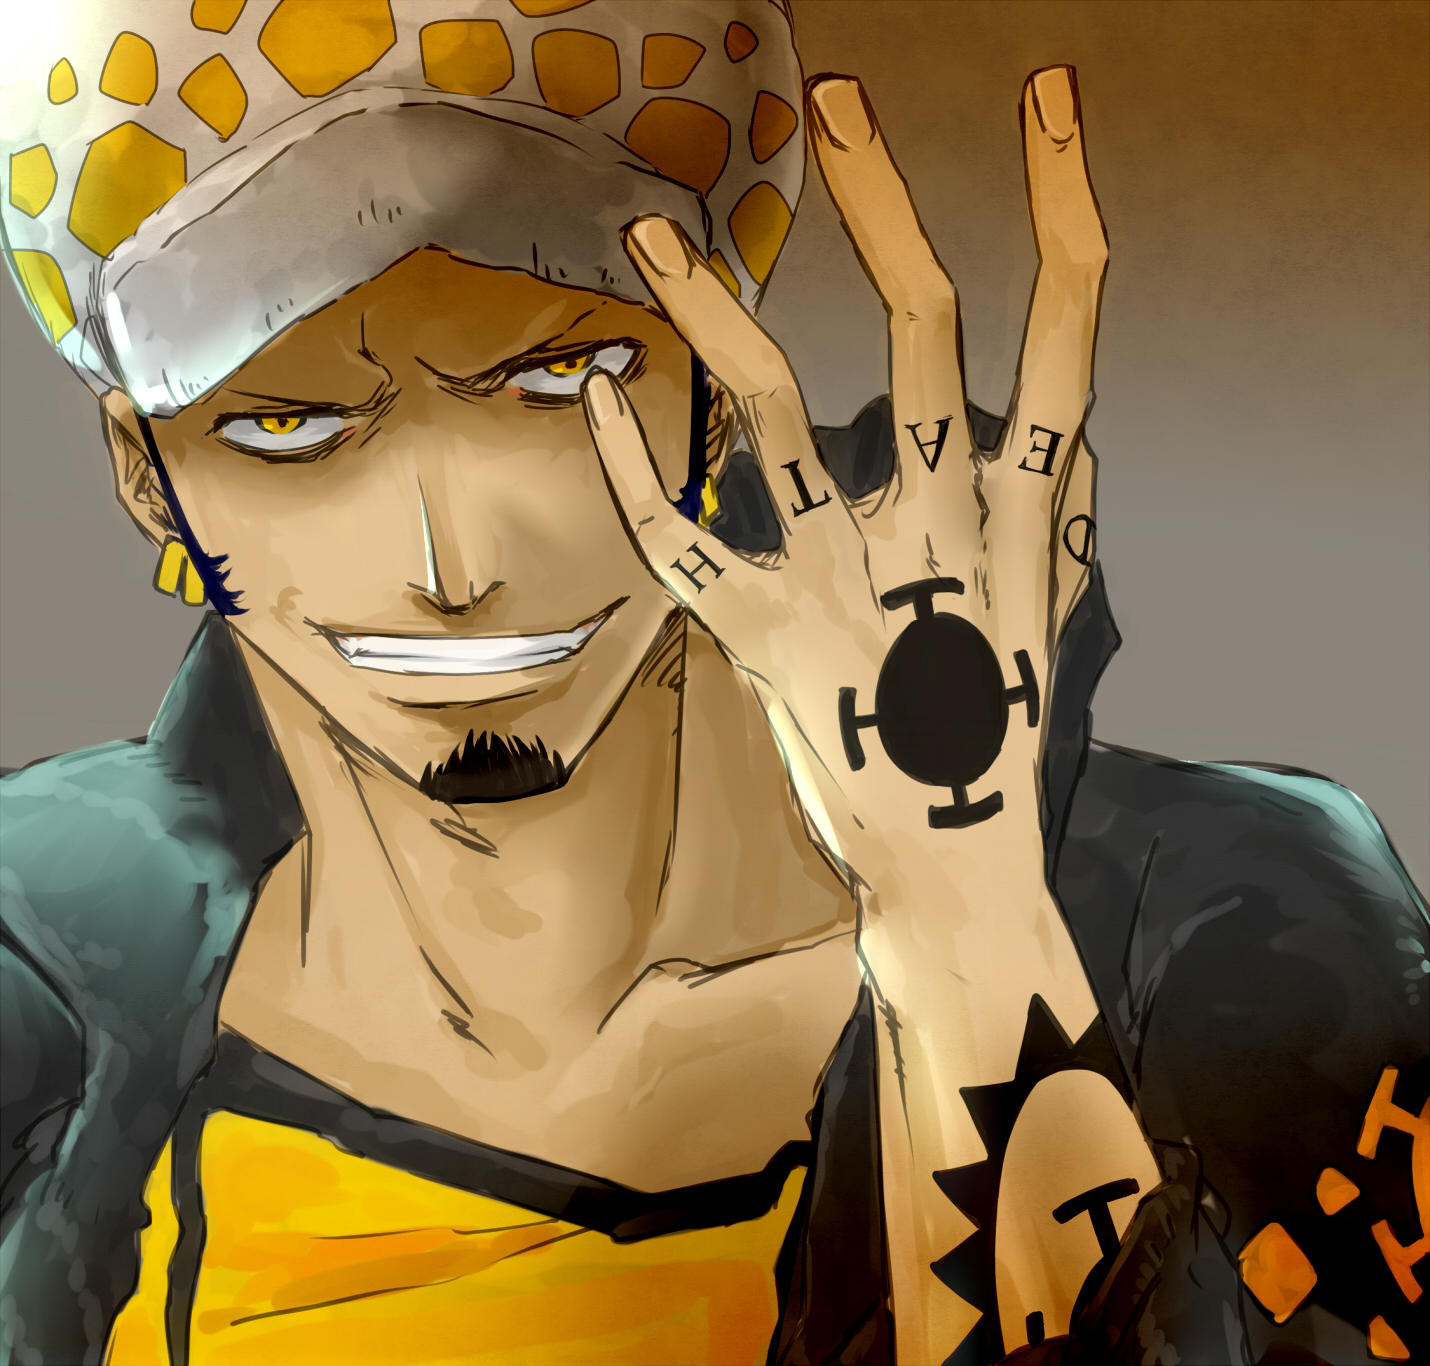 Trafalgar Law Images Trafalgar Law Hd Wallpaper And One Piece Cool Characters 2476 Hd Wallpaper Backgrounds Download